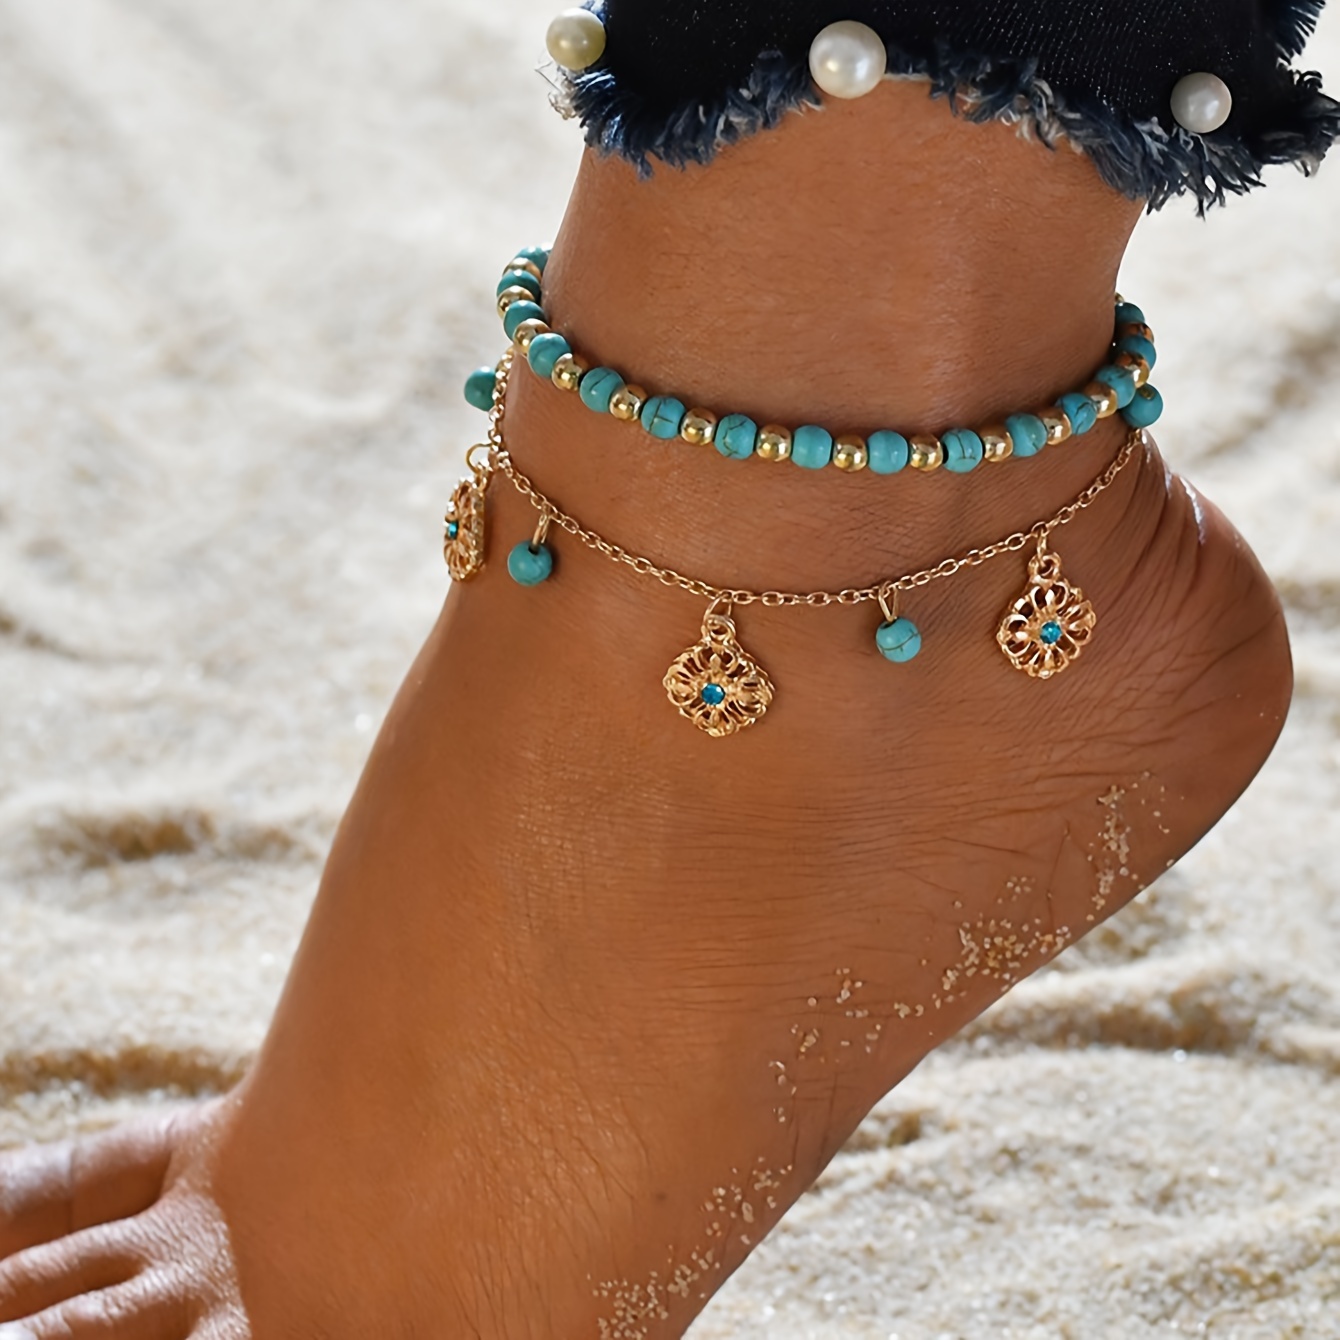 

2 Pcs Set Of Delicate Blue Rice Beads Flower Pendant Anklet Vintage Bohemian Style Trendy Female Summer Beach Foot Chain